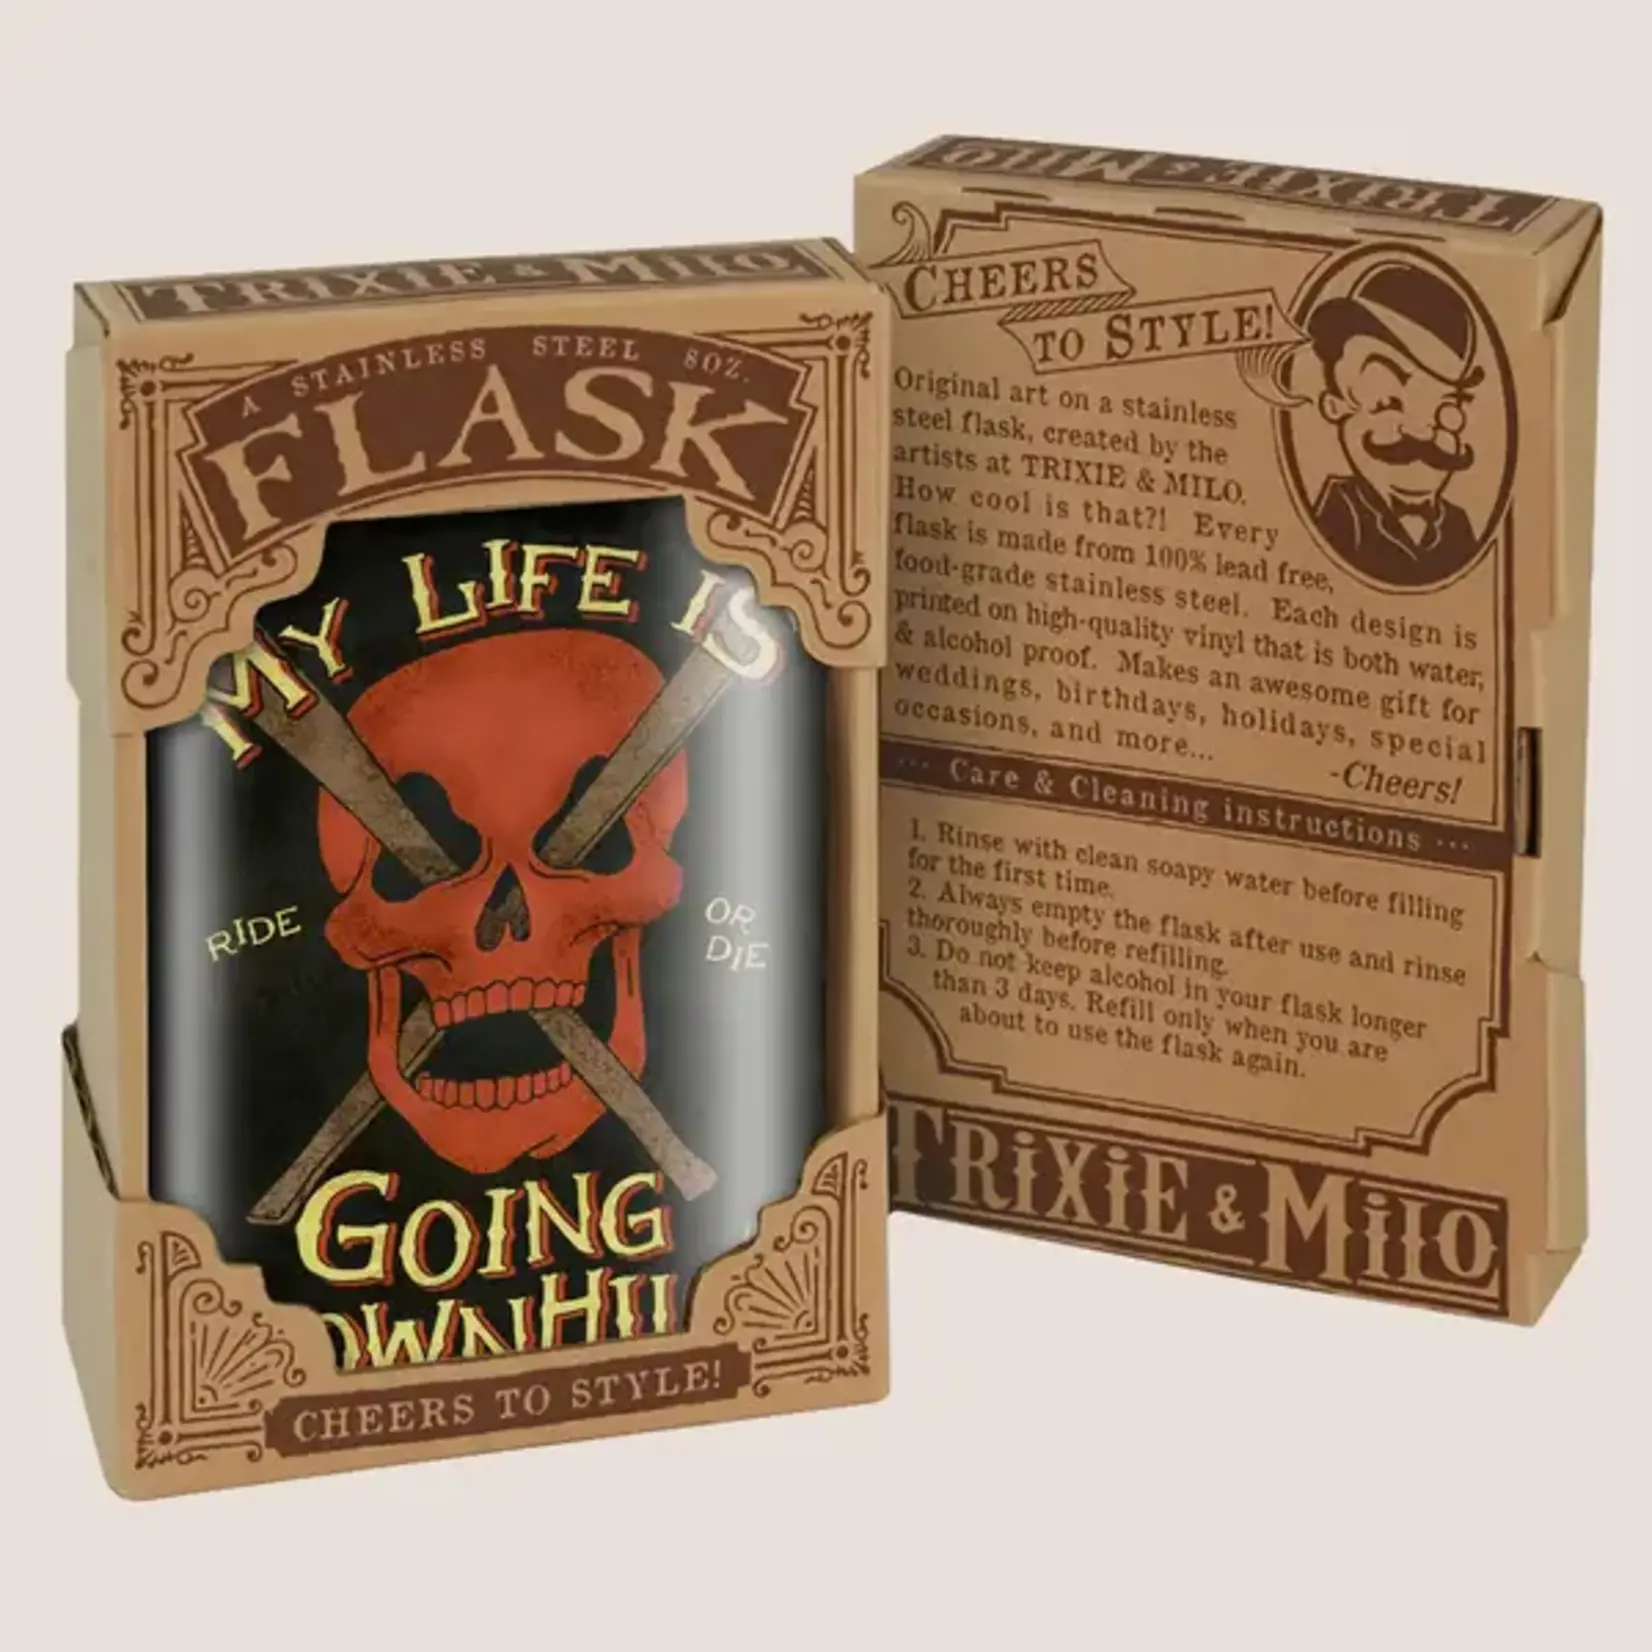 Trixie & Milo Flask 8oz - My Life is Going Downhill